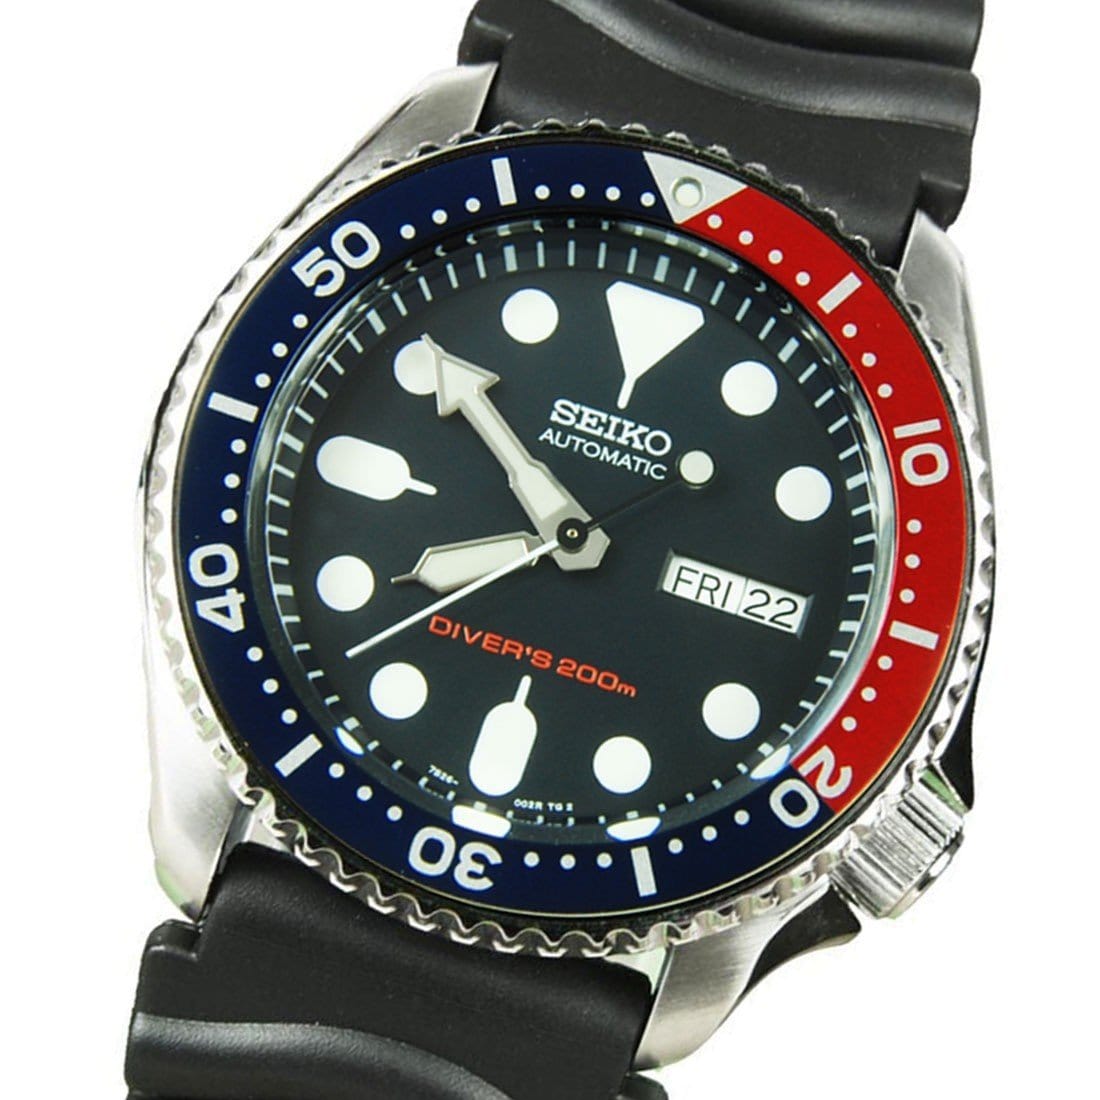 SKX009K1 SKX009 Seiko Automatic Blue Dial Mens Dive Watch with Extra Strap